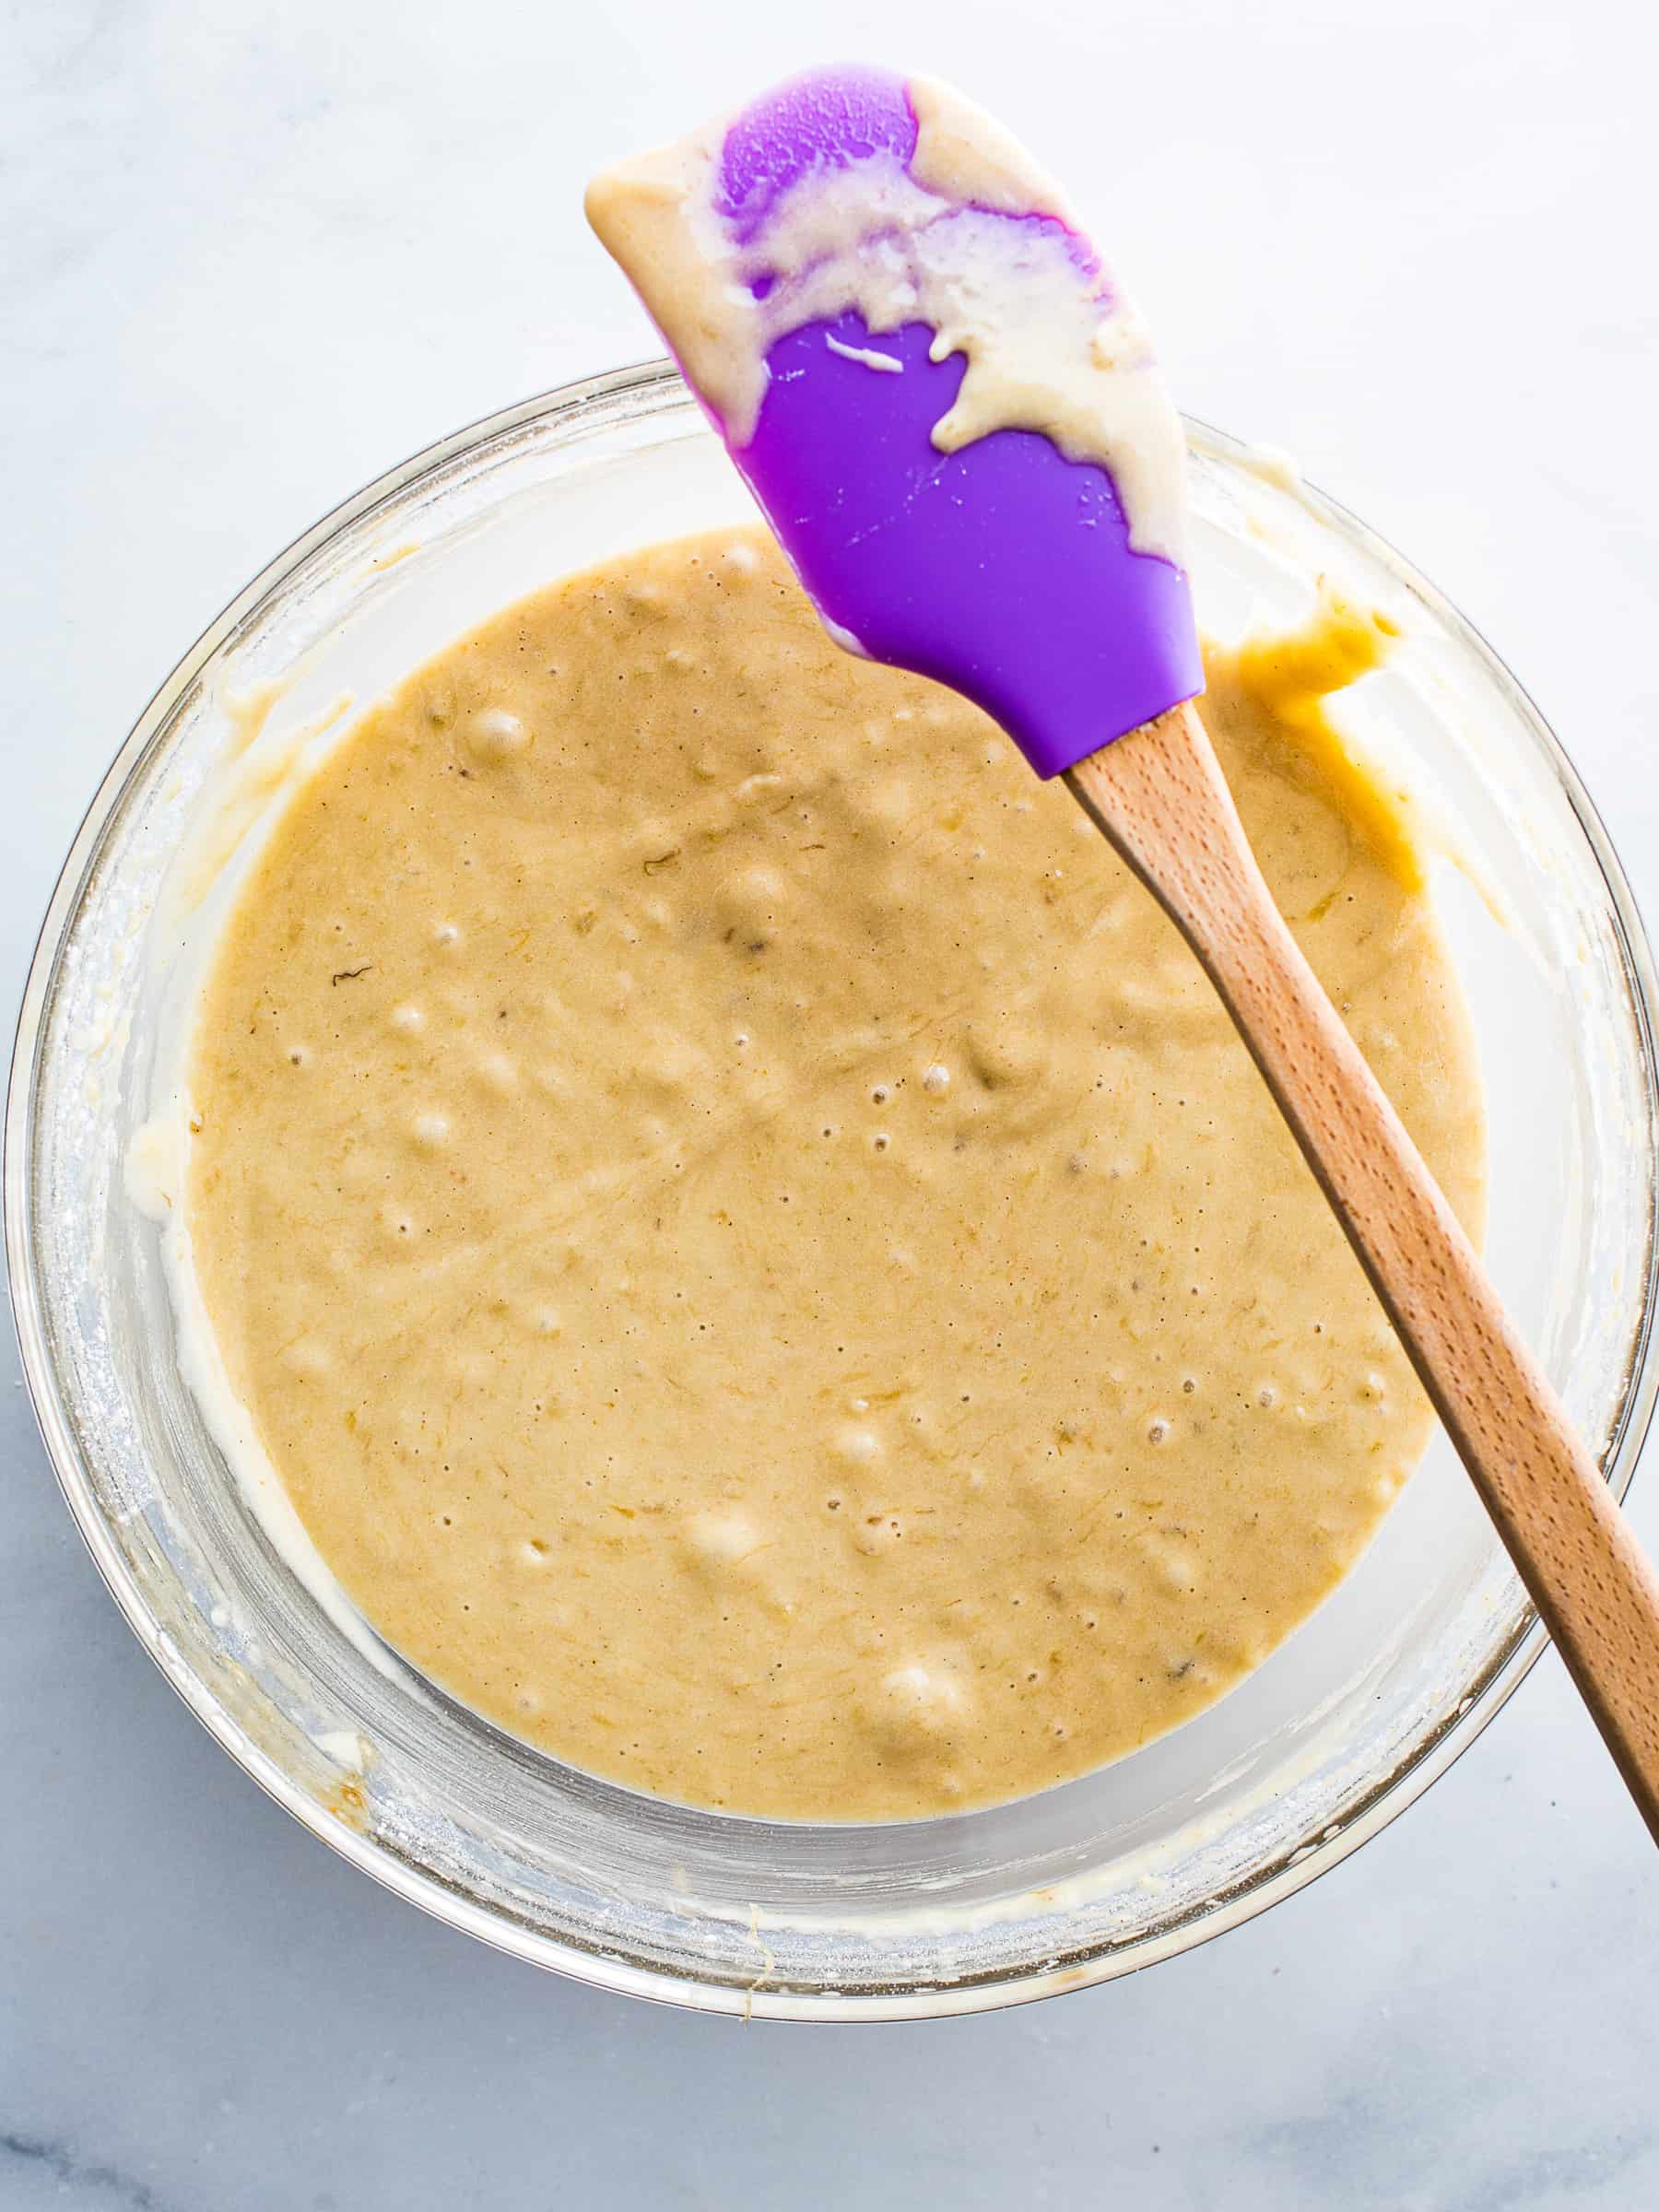 Gluten-free banana muffin batter in a glass bowl. There is a purple spatula sitting on the bowl.